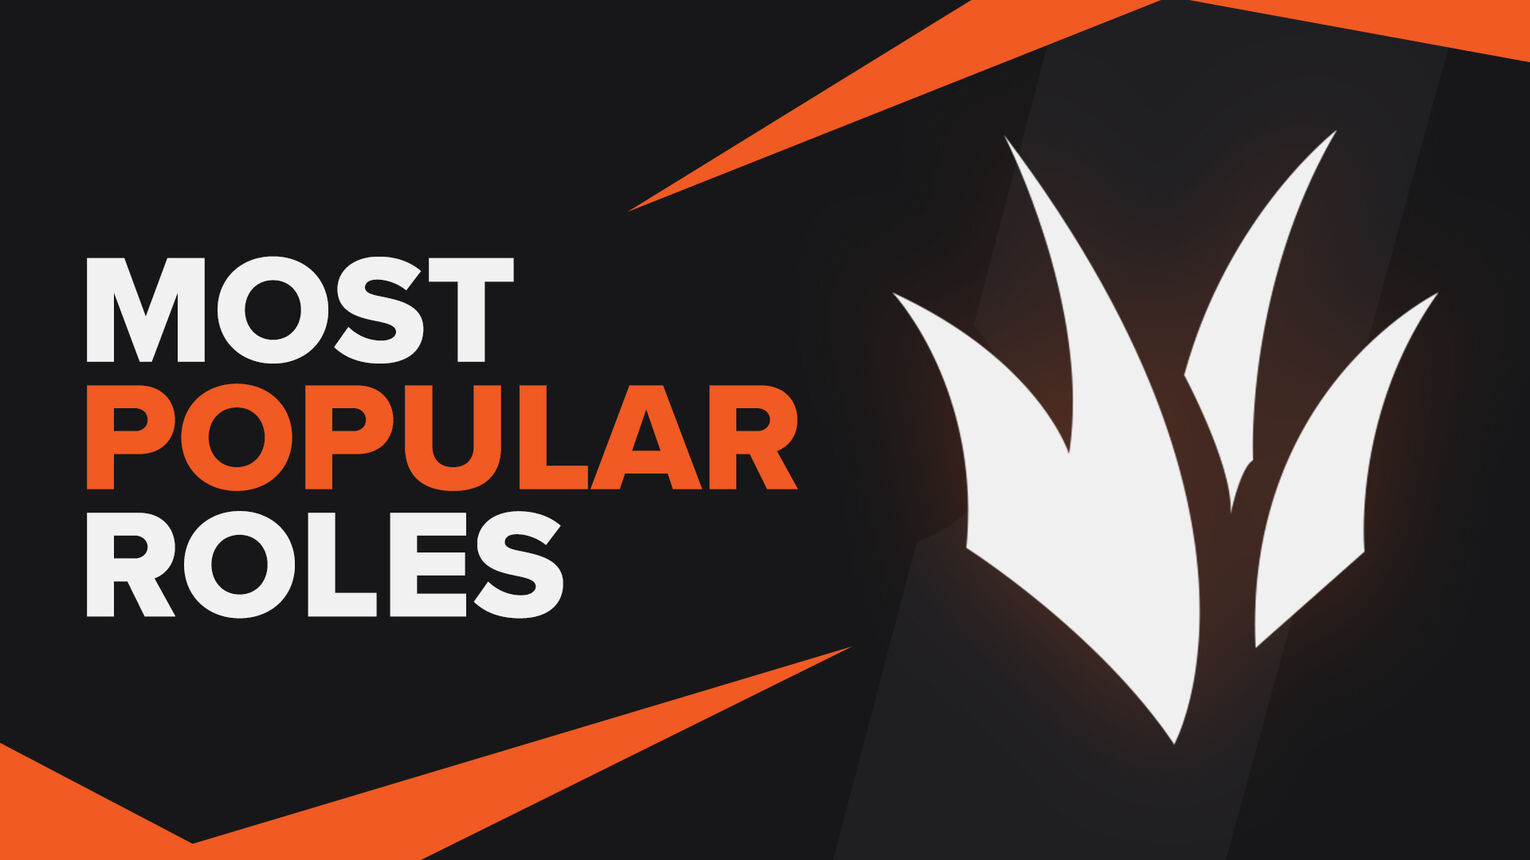 What Are The Most Popular Roles in LoL [Ranked]